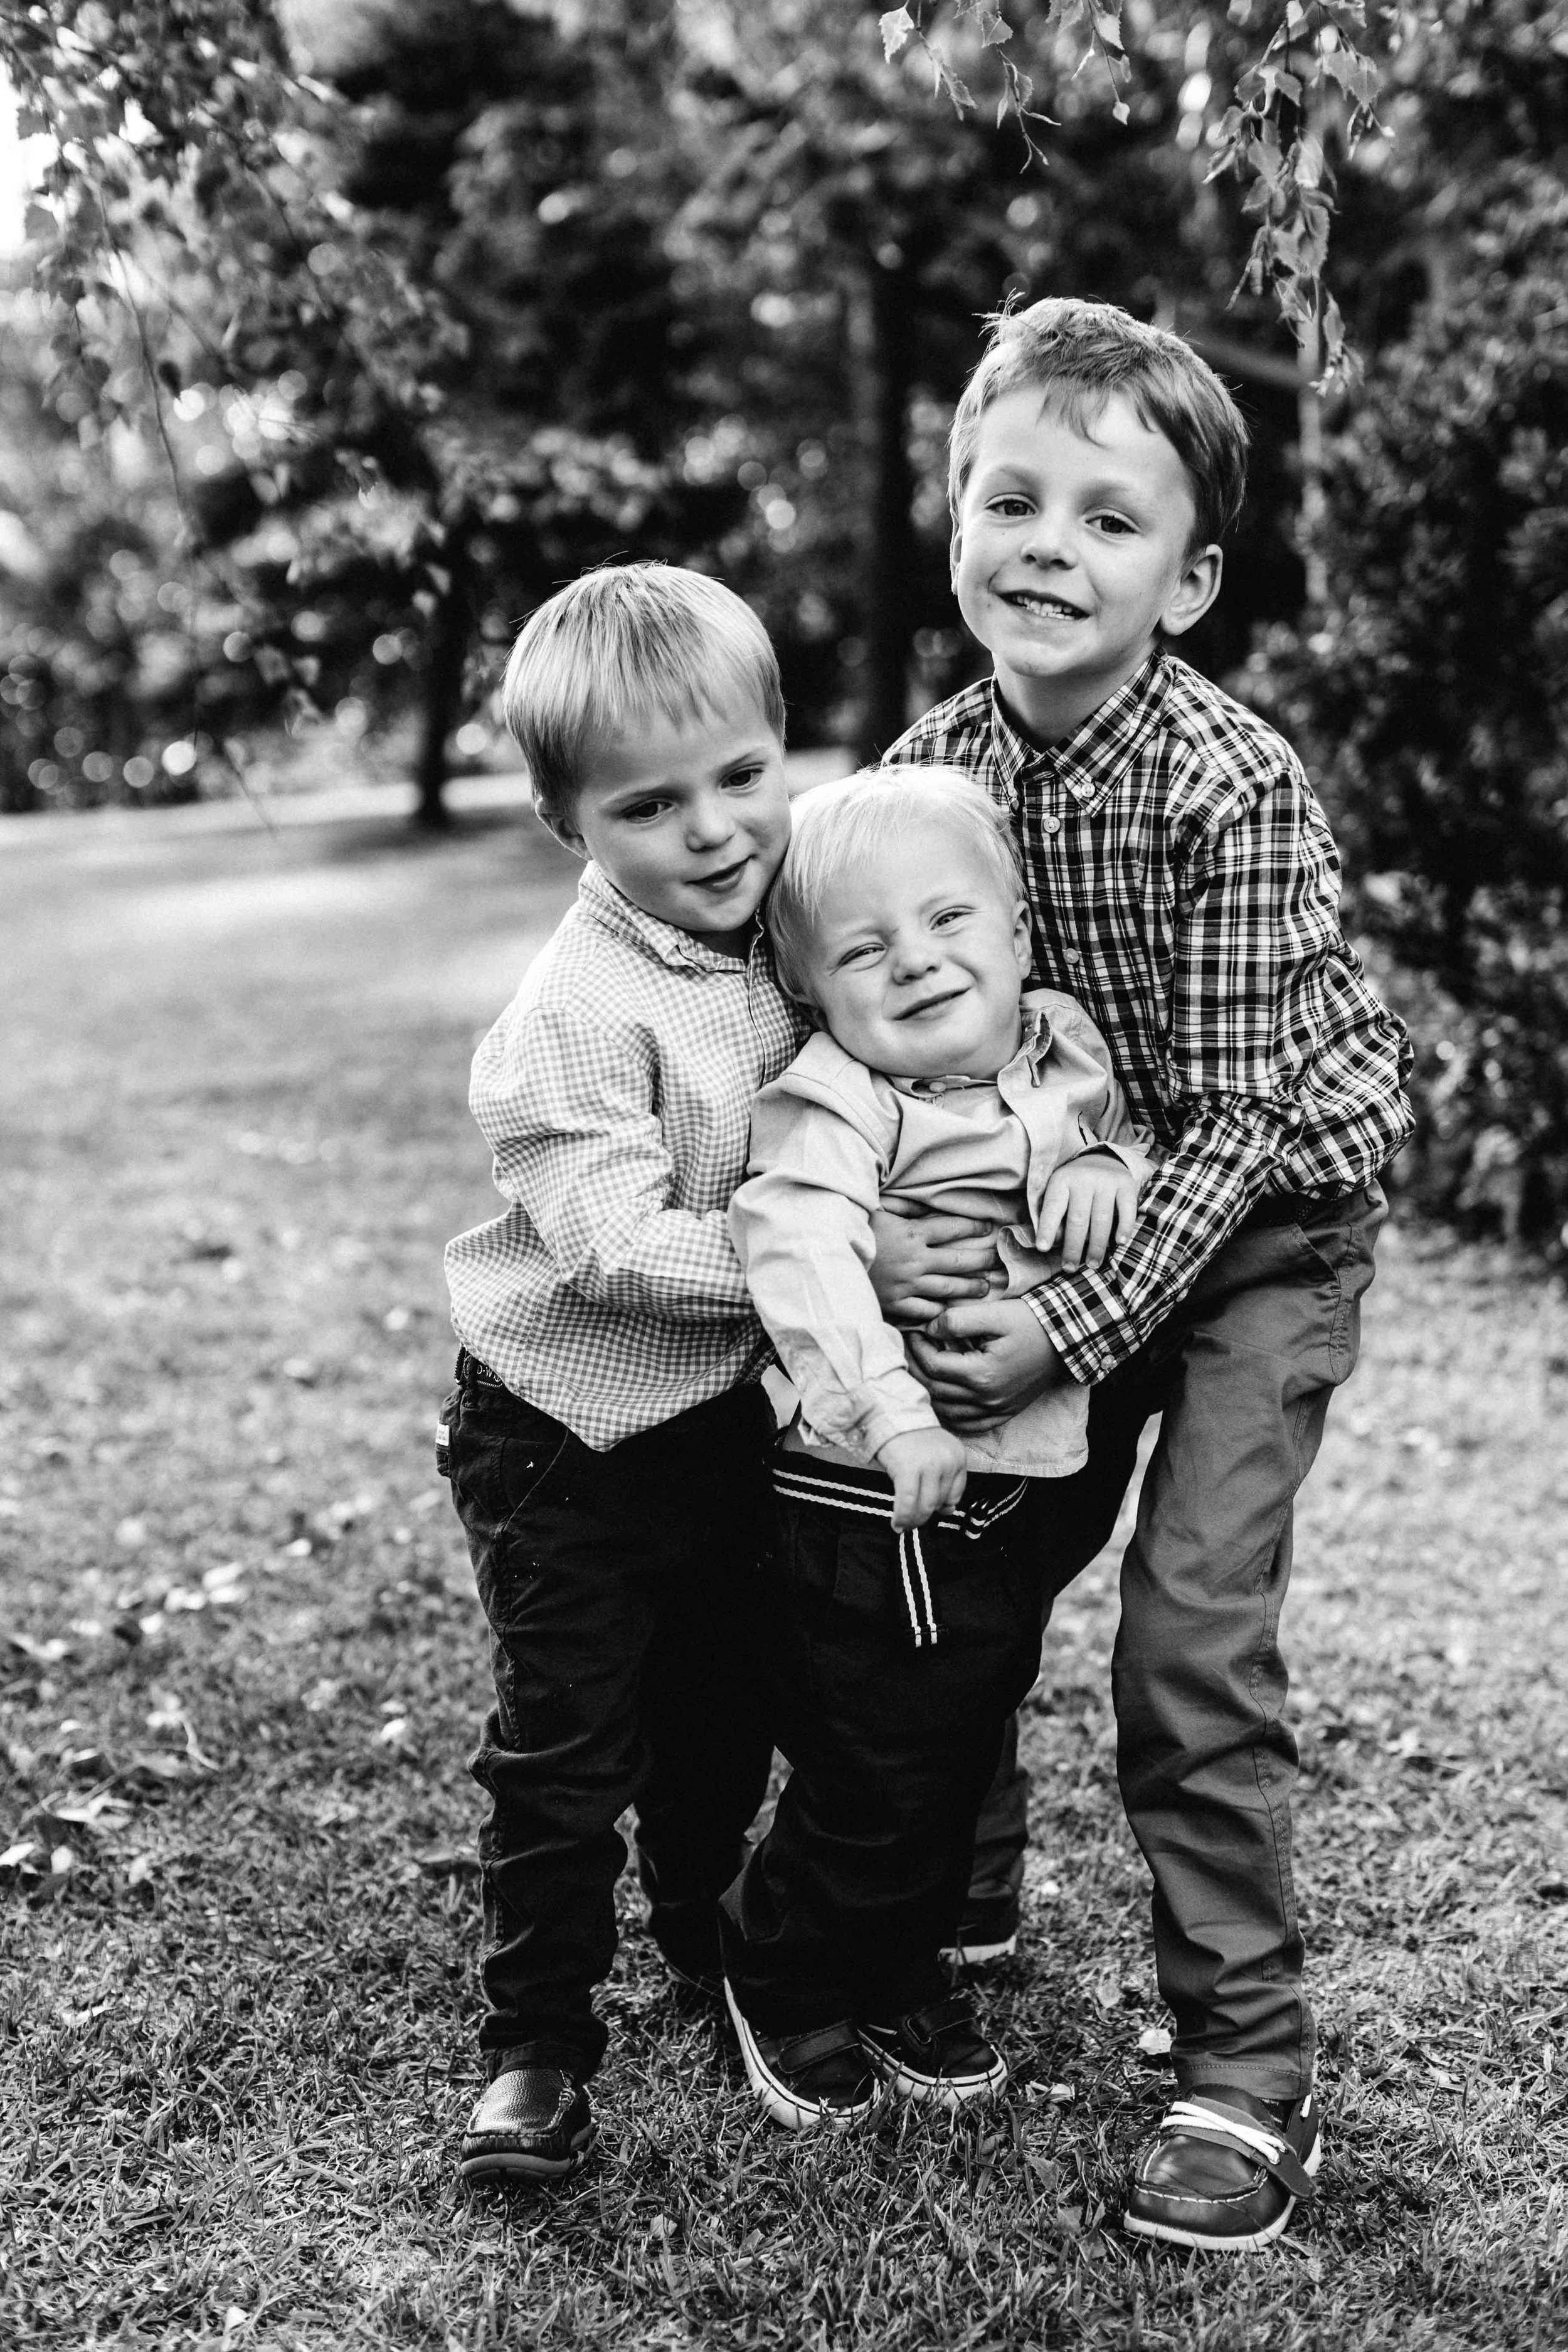 mittagong-bowral-southern-highlands-family-photography-www.emilyobrienphotography.net-lee-family-session-31.jpg